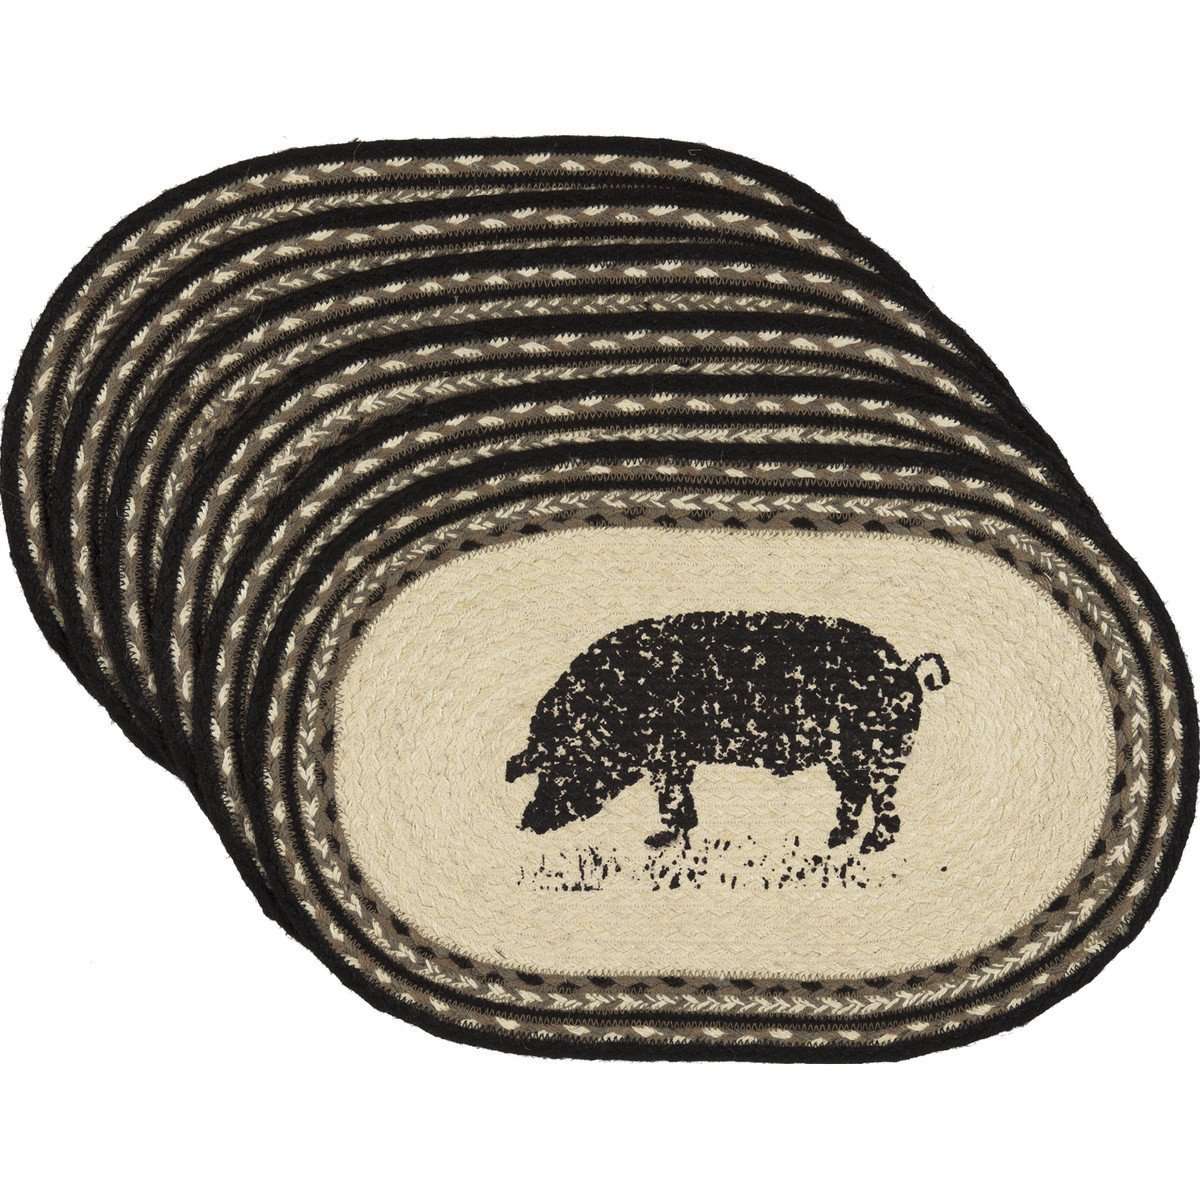 Sawyer Mill Charcoal Pig Jute Braided Placemat Set of 6 - The Fox Decor